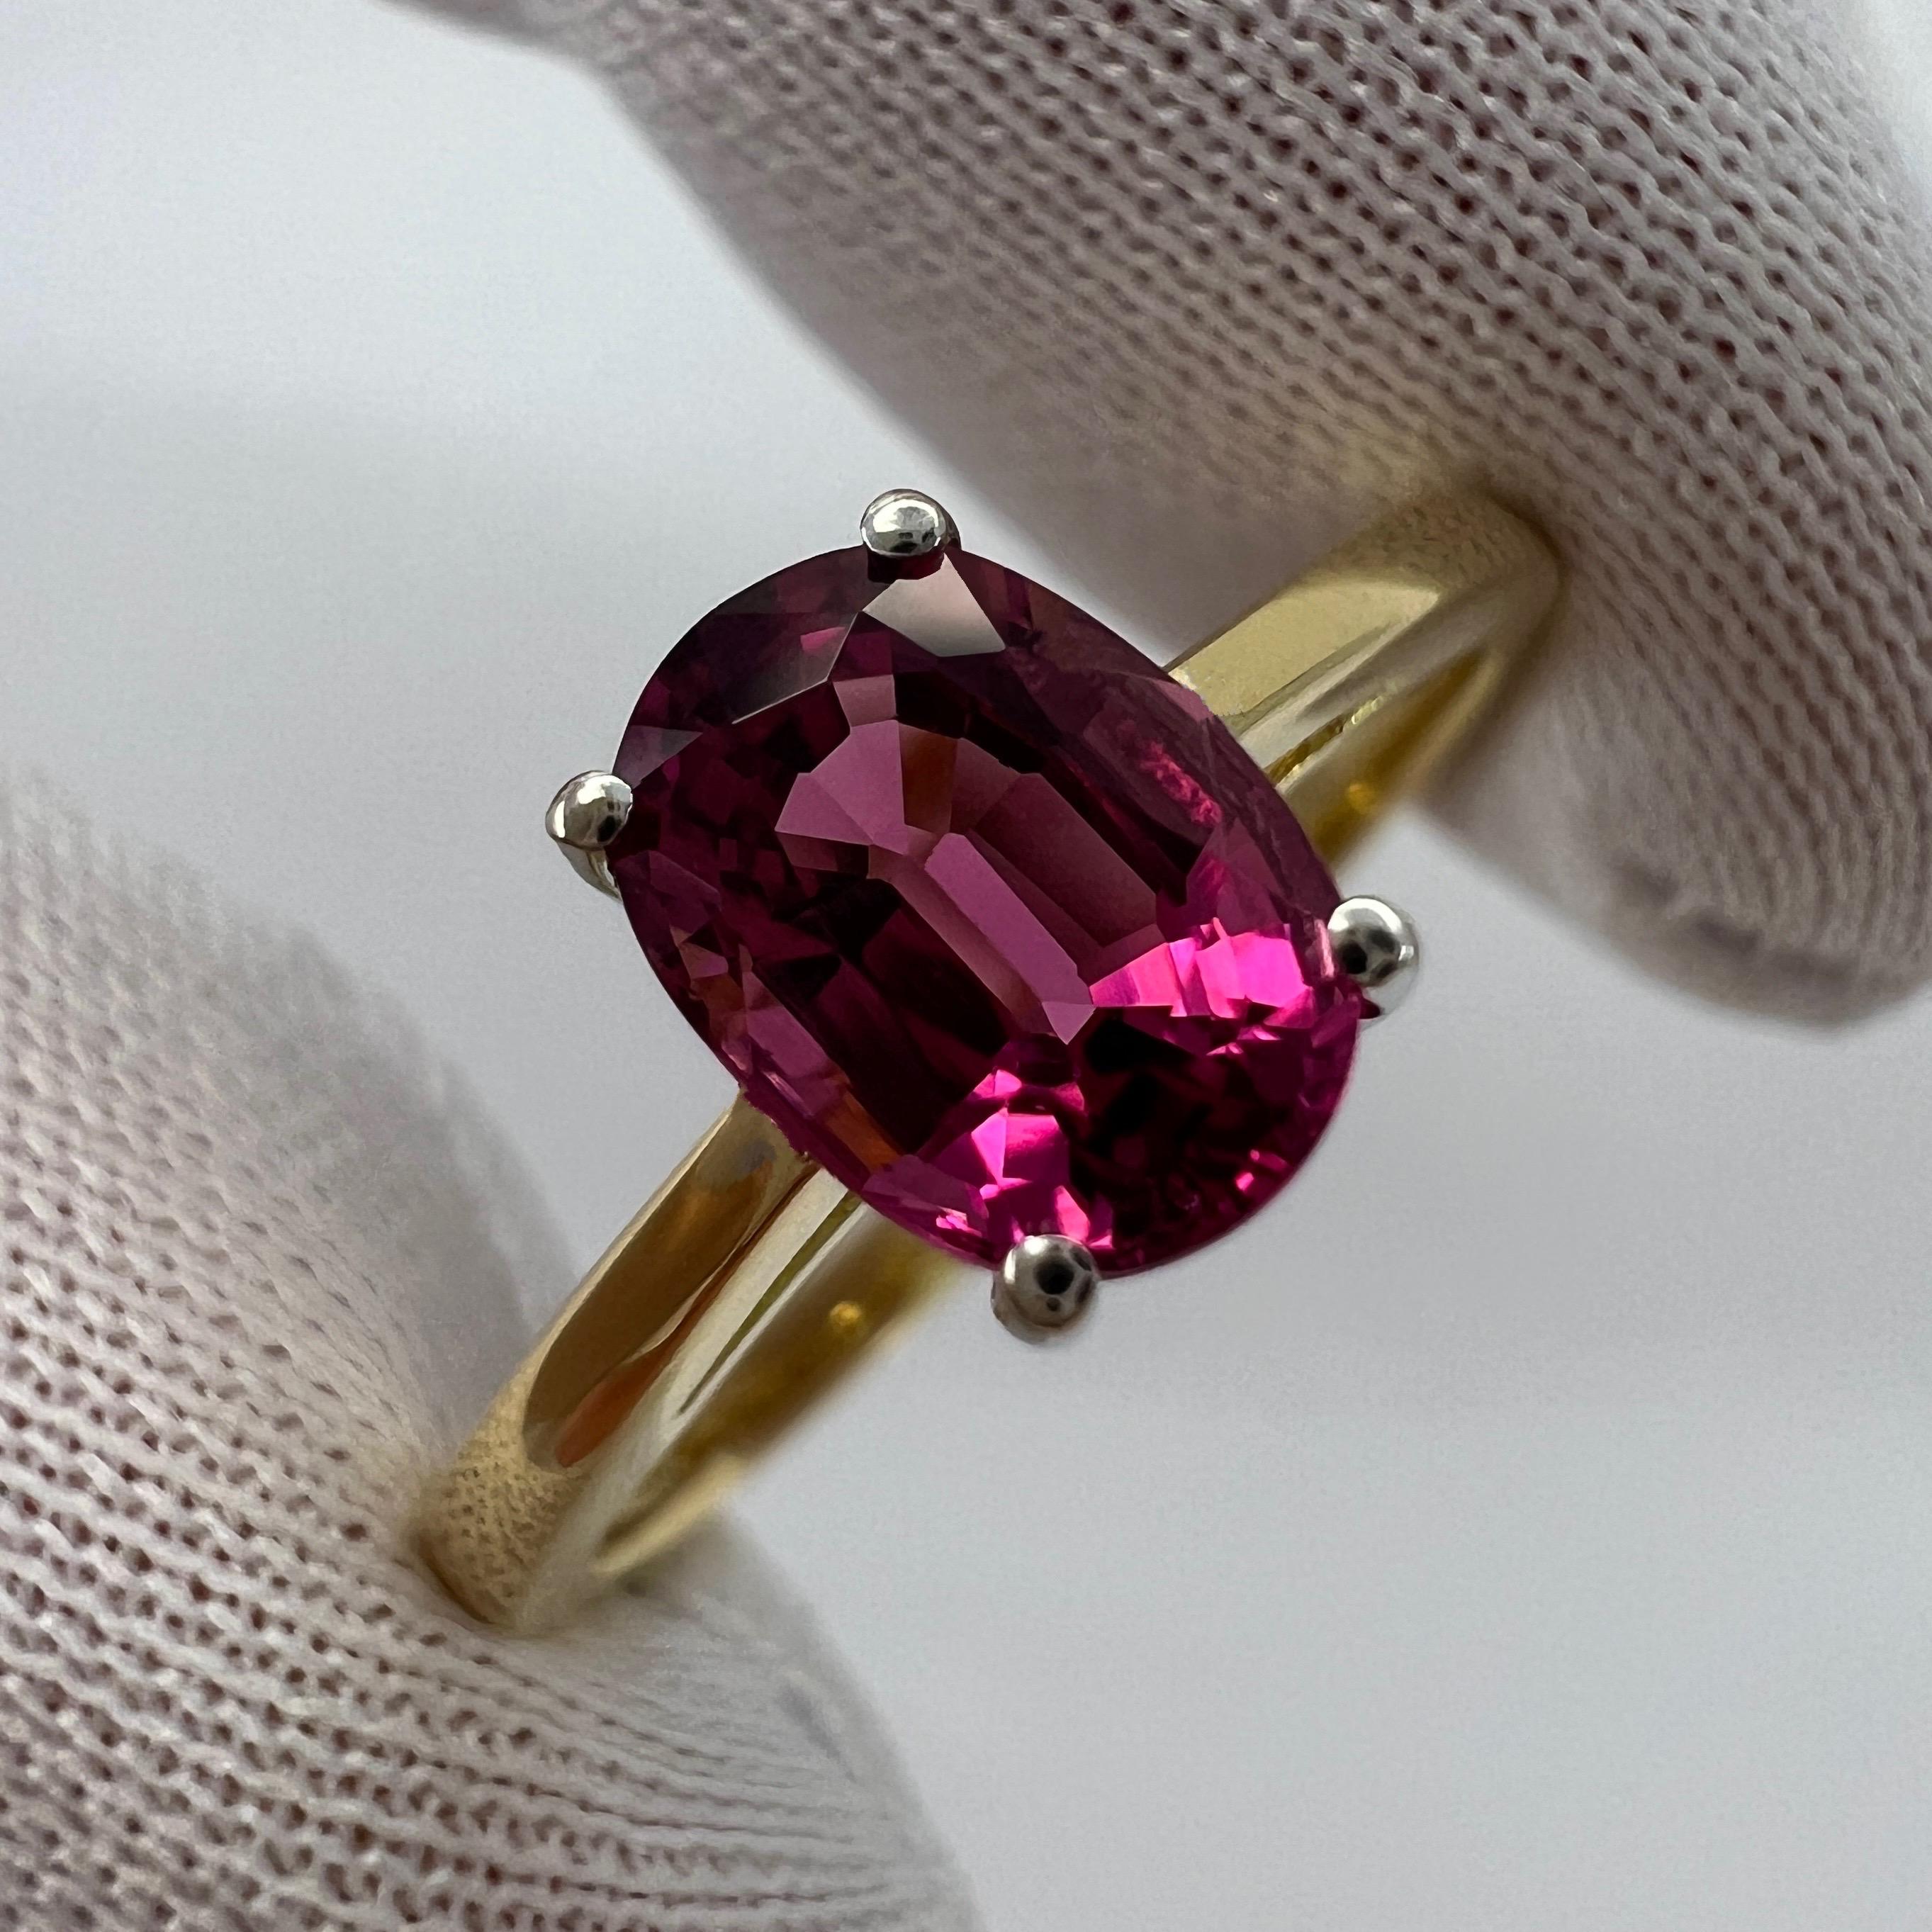 Vivid Pink Purple Rubellite Tourmaline Oval Cut 18k Yellow & White Gold Solitaire Ring.

1.10 Carat rubellite tourmaline with a stunning vivid pink purple colour and excellent clarity. Very clean stone.

Also has an excellent oval brilliant cut